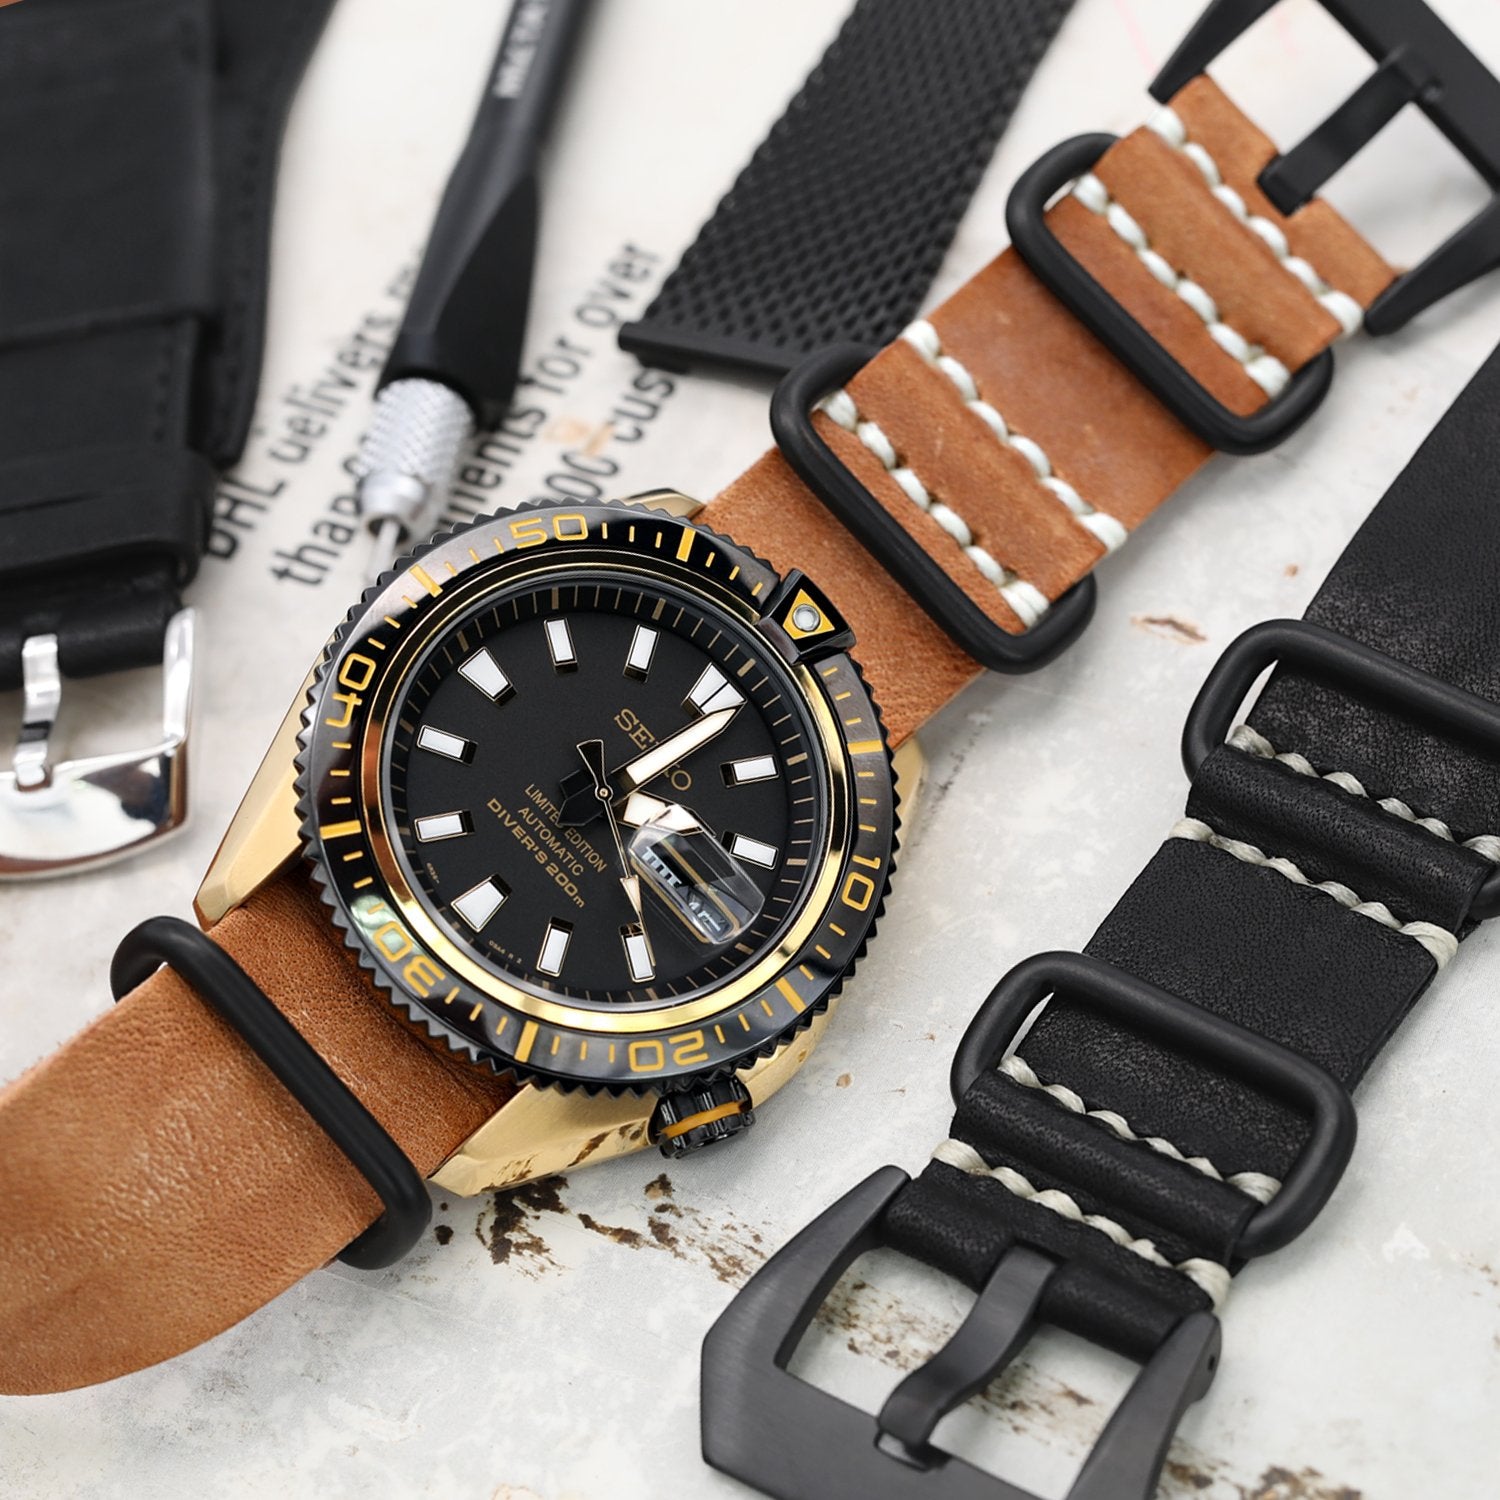 22mm Leather Nato Strap on Seiko Superior Limited Edition Stargate II SRP510 Gold Tone Diver Strapcode Watch Bands